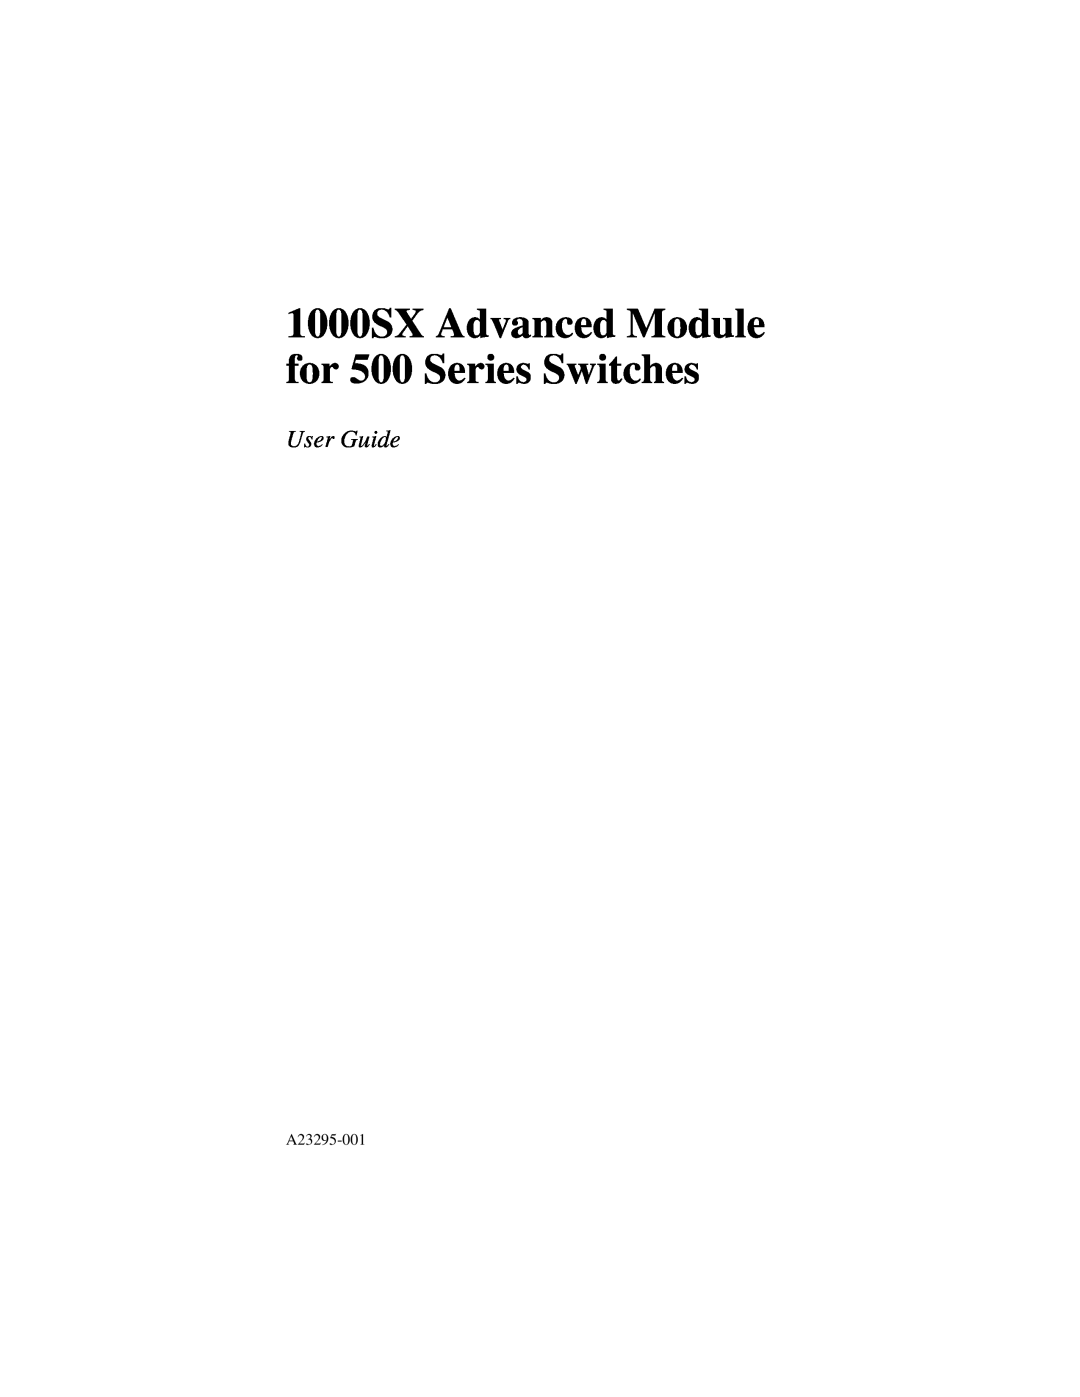 Intel manual 1000SX Advanced Module for 500 Series Switches, User Guide, A23295-001 